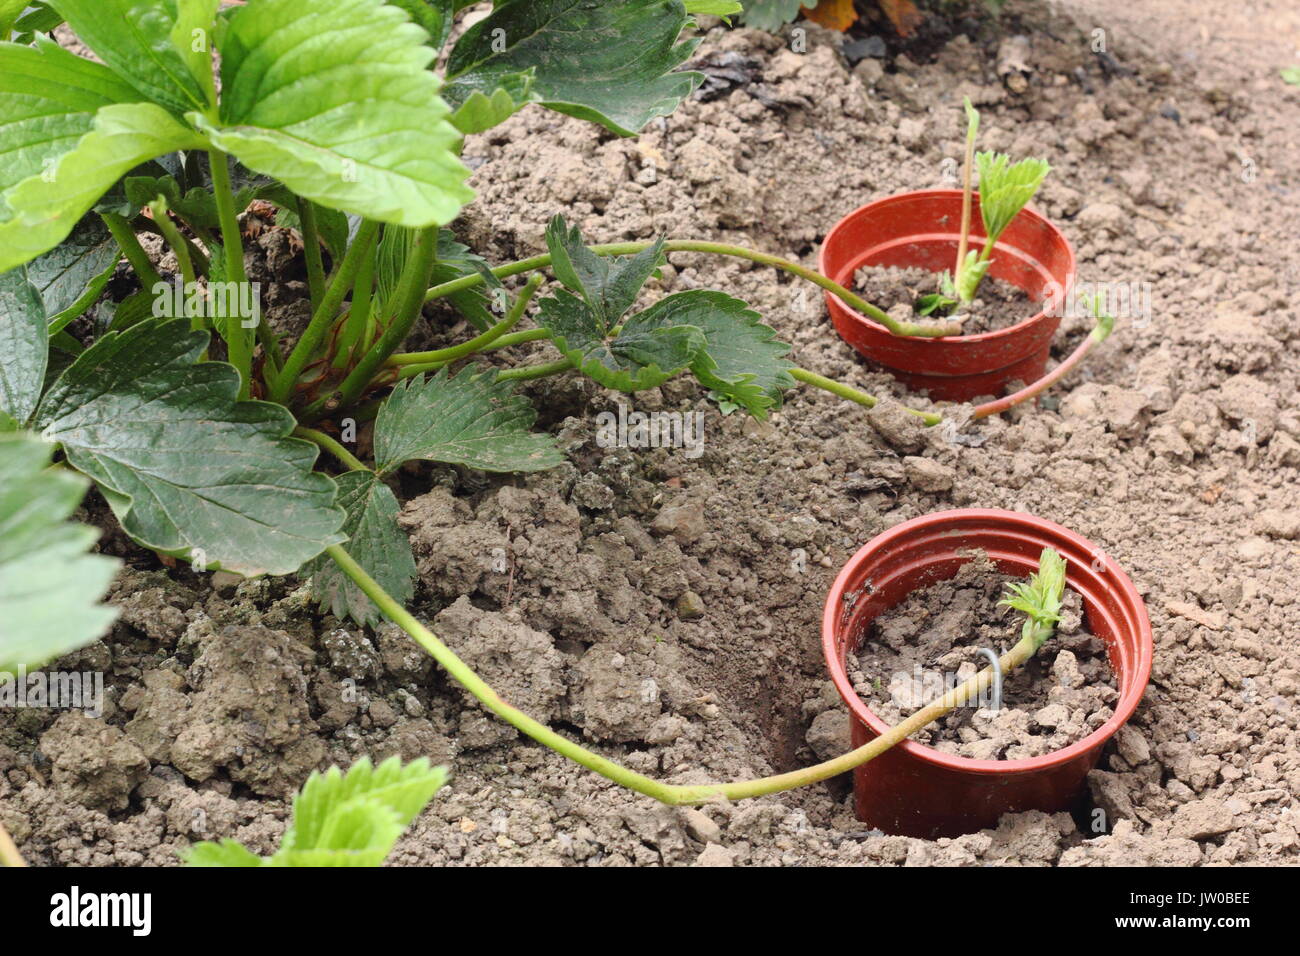 Runners from a healthy, mature strawberry plant are pegged into pots sunk into the ground to propagate new plants in an English kitchen garden,UK Stock Photo